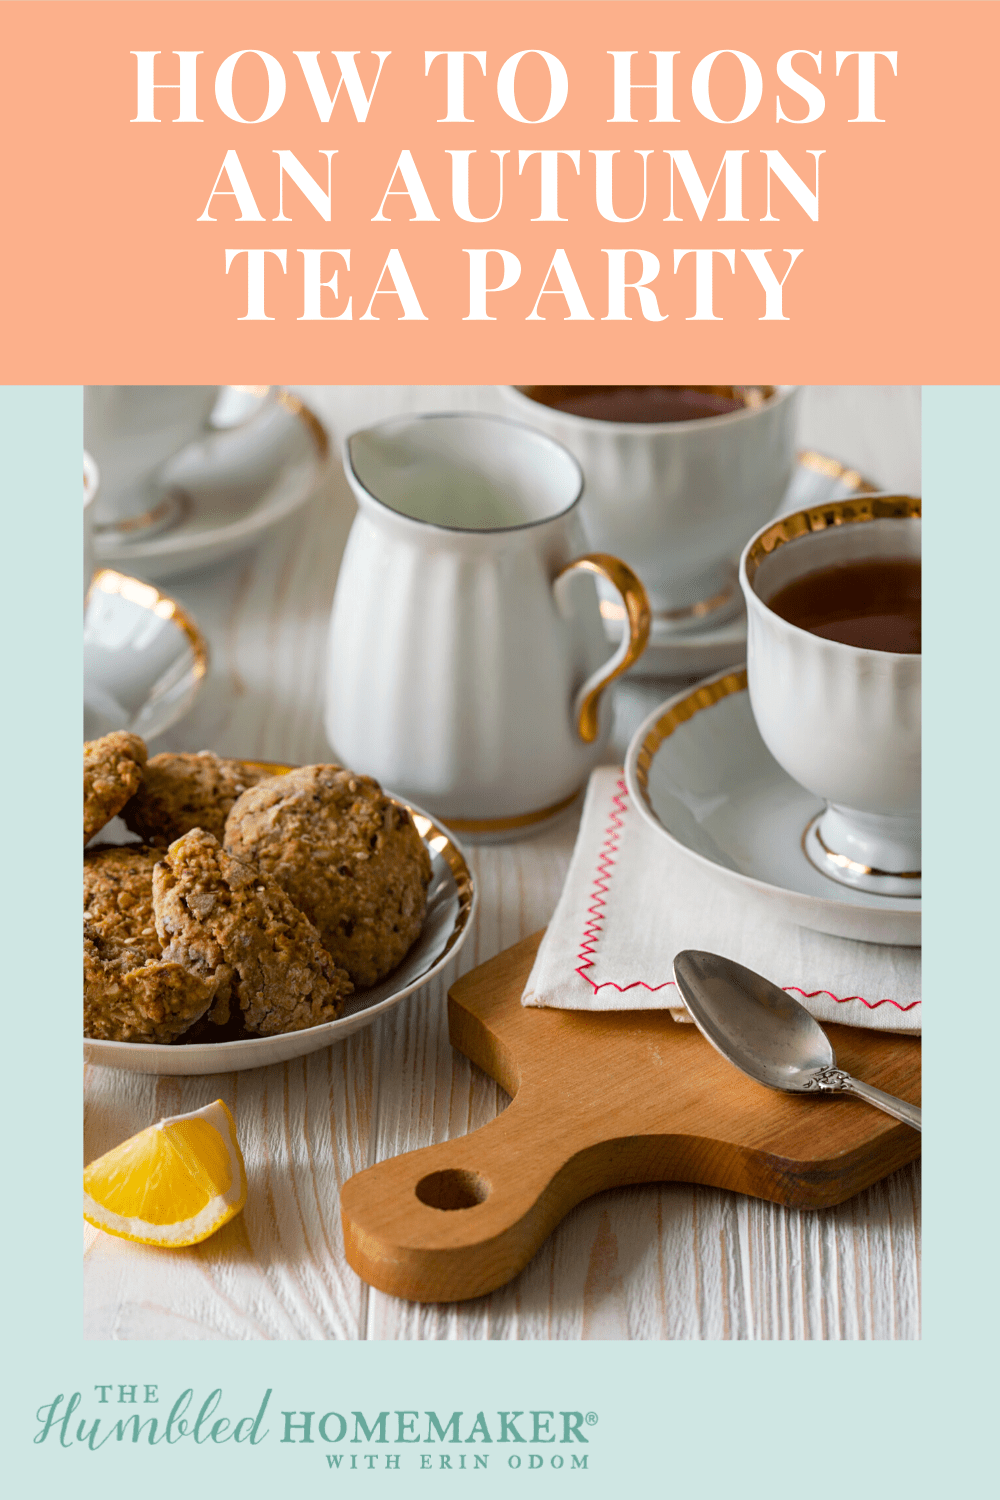 Host an autumn tea party with these fall tea party menu ideas, pretty place settings, and a recipe for gluten-free apple cake. It’s tea time!